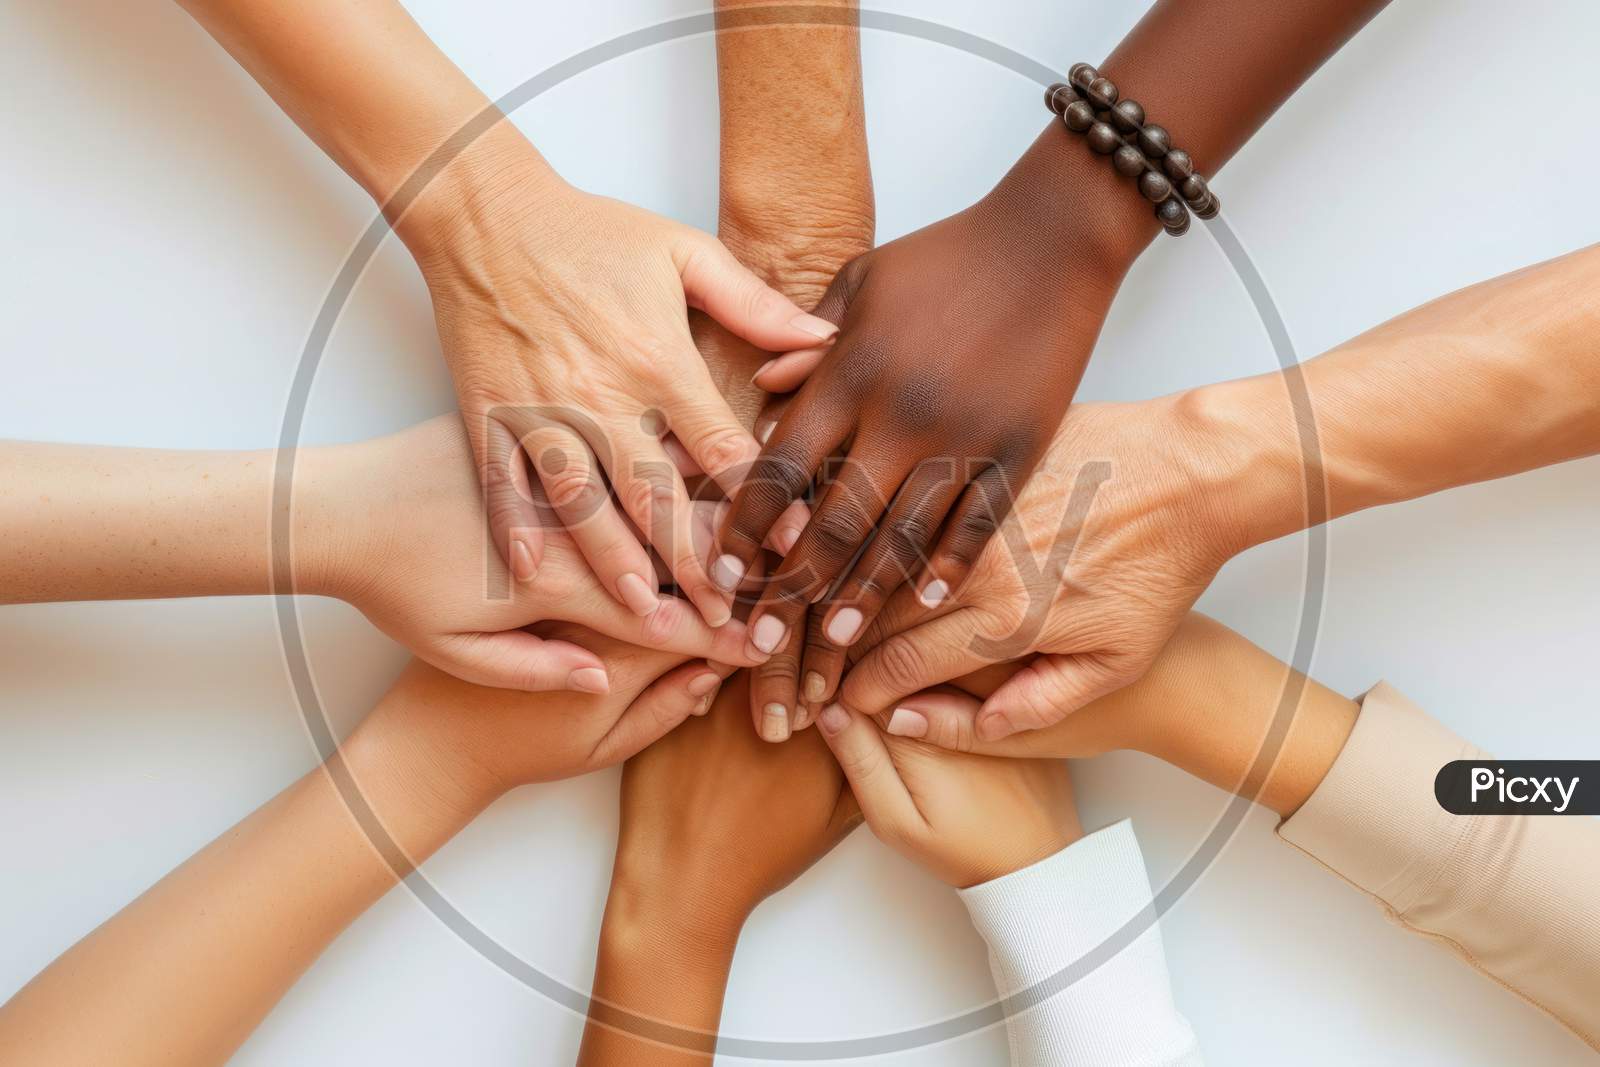 United Circle Of Women'S Hands From Various Backgrounds. Close-Up Of A United Circle Of Hands From Women Of Diverse Ethnic Backgrounds On A White Backdrop.